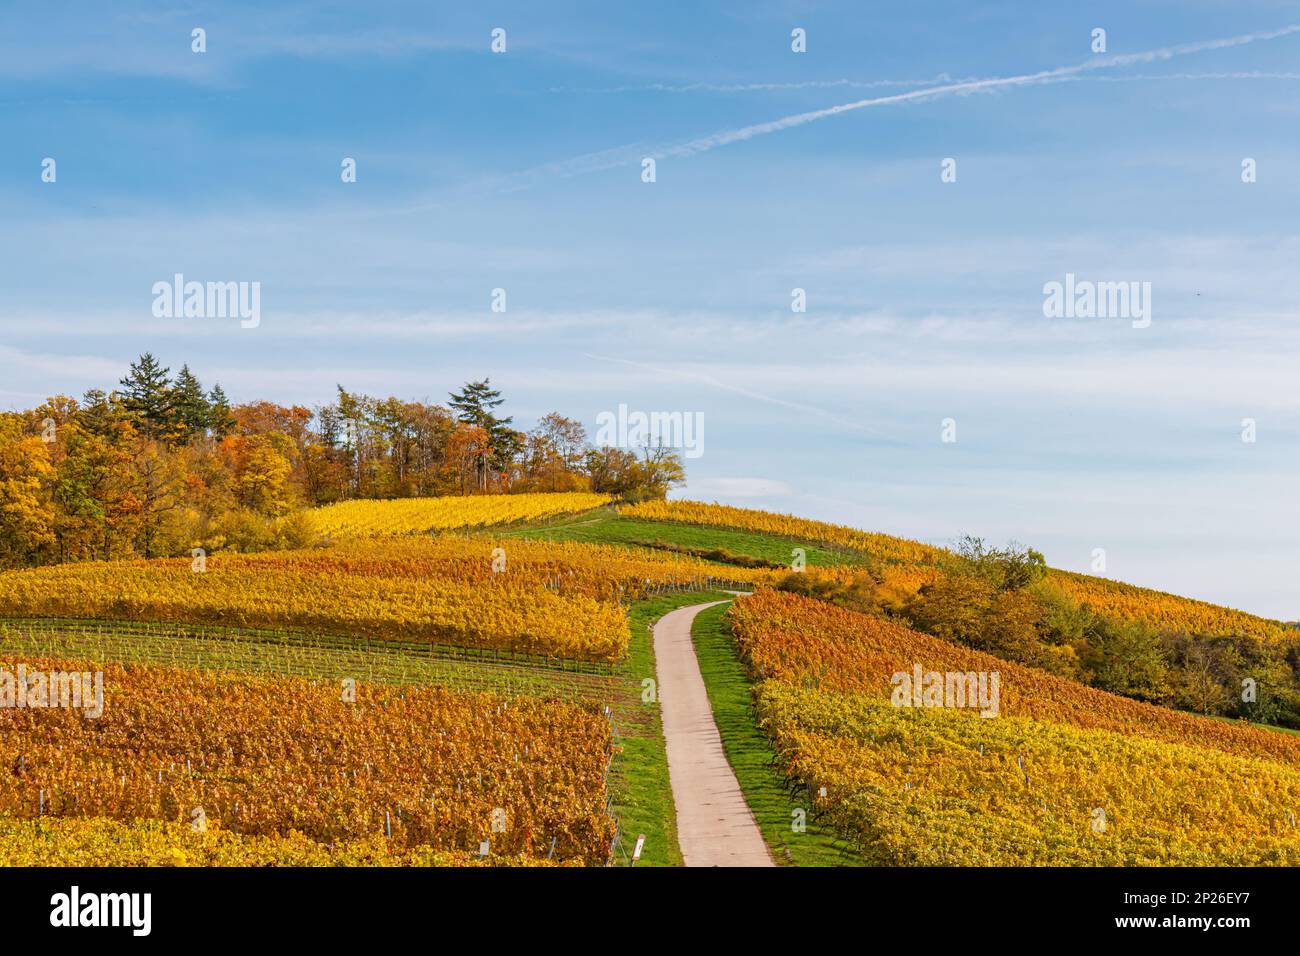 Autumn colorful vine leaves in the vineyard Stock Photo